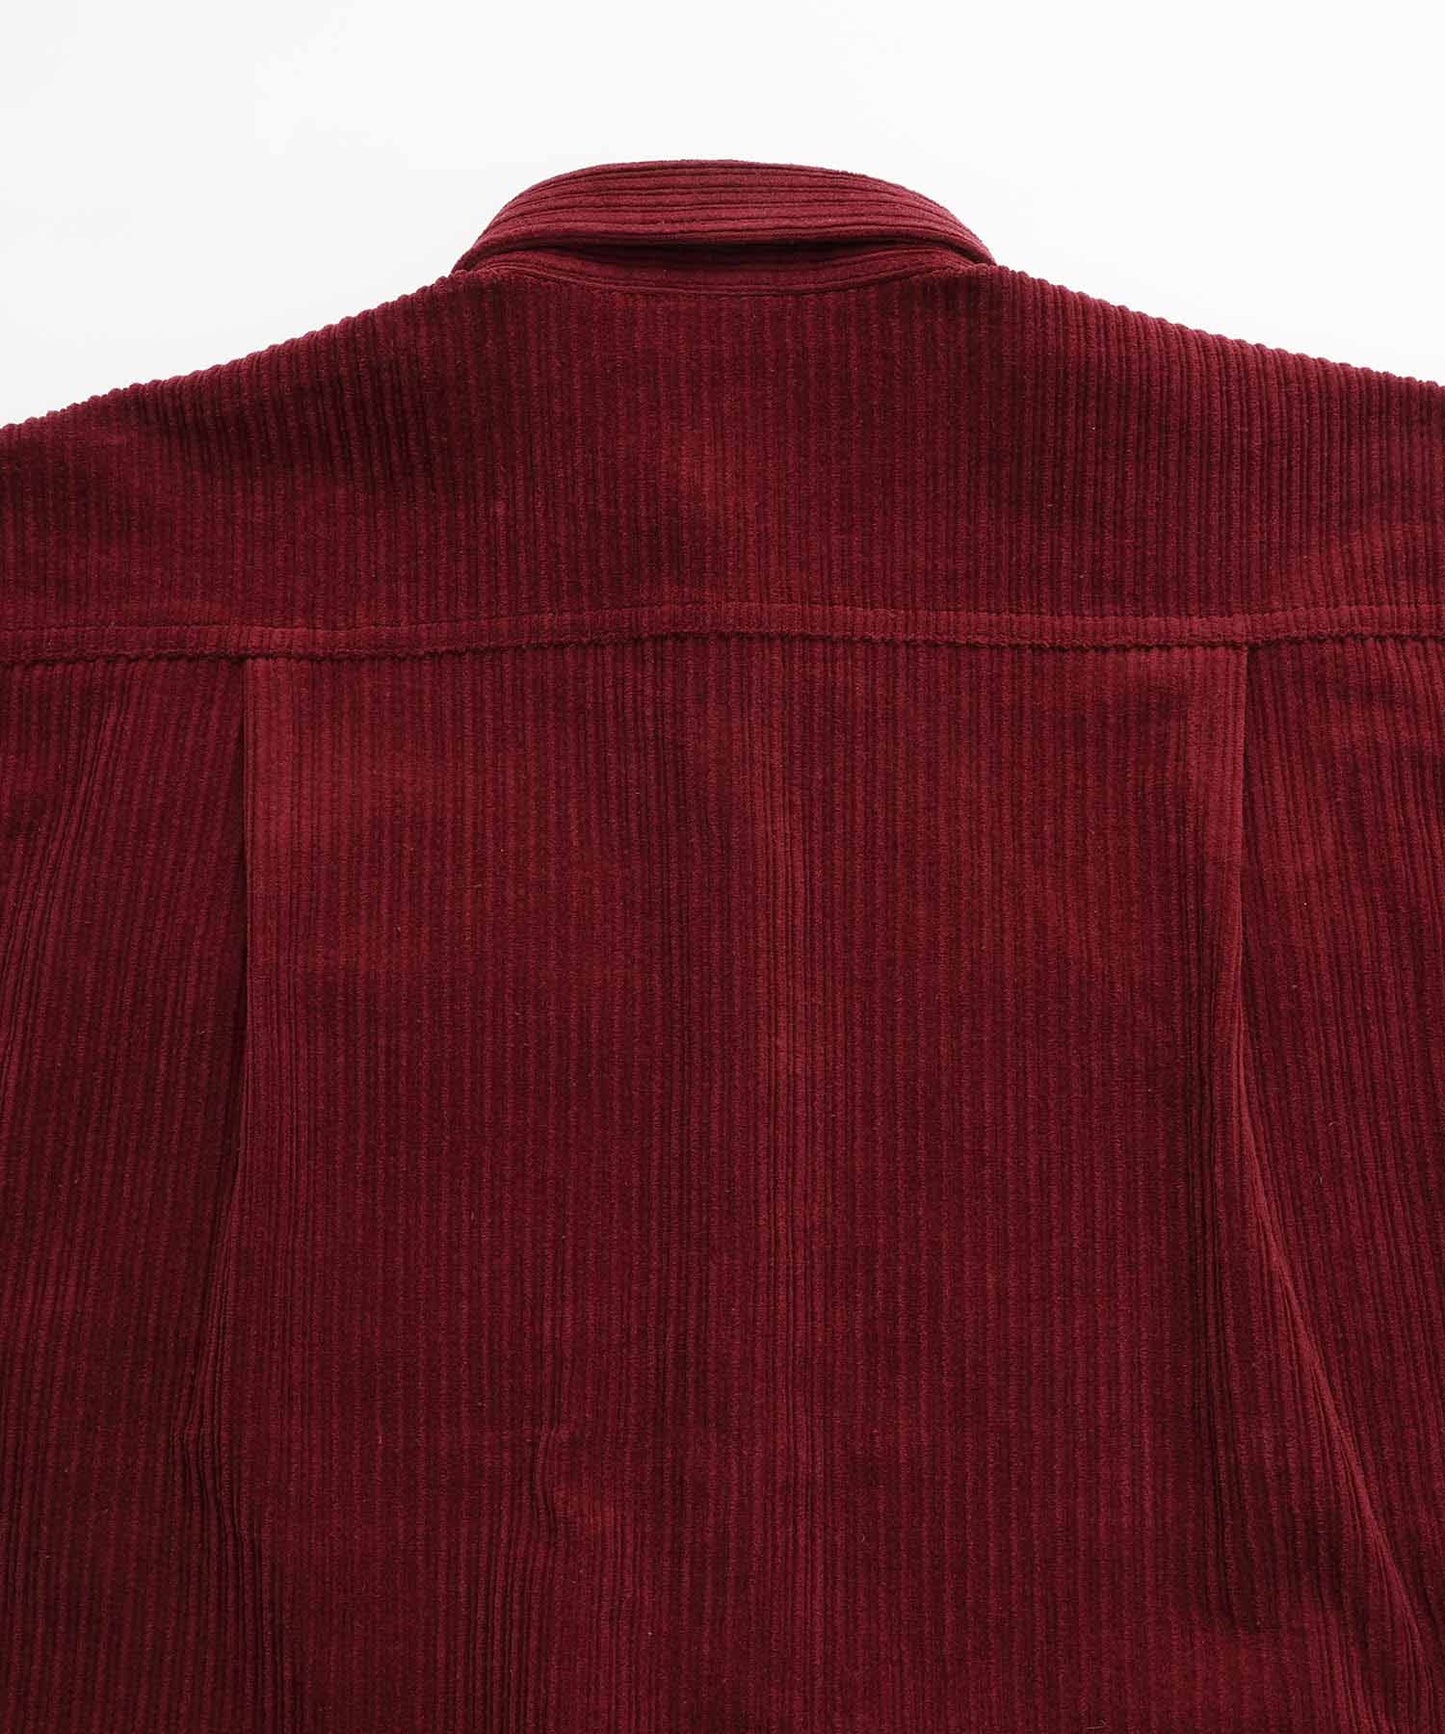 FACE EMBROIDERY CORDUROY SHIRT